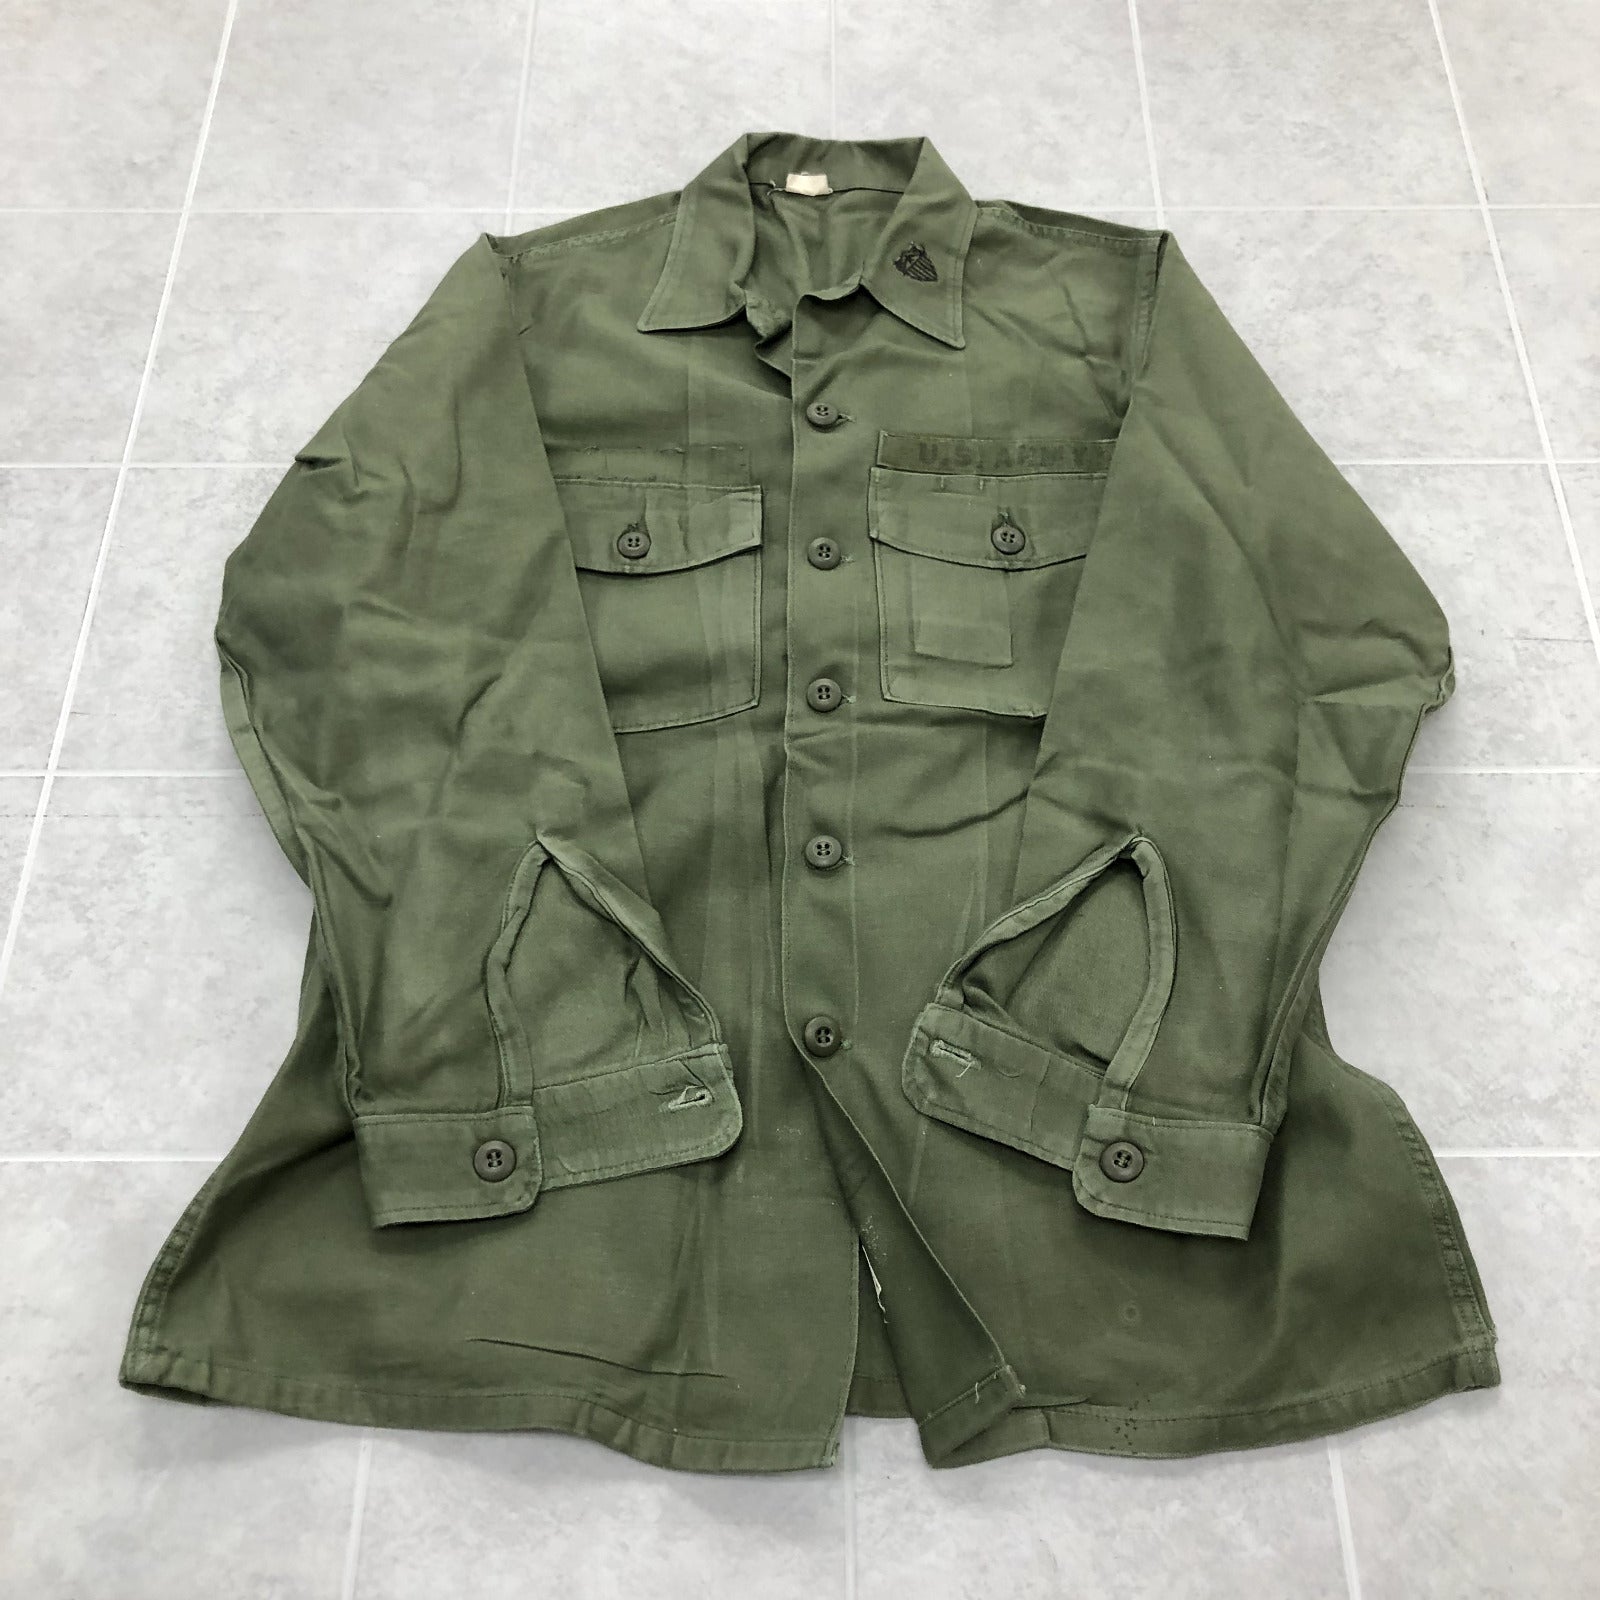 Vintage US Military Green Long Sleeve Button Up Shirt Adult Size 15.5 x 33